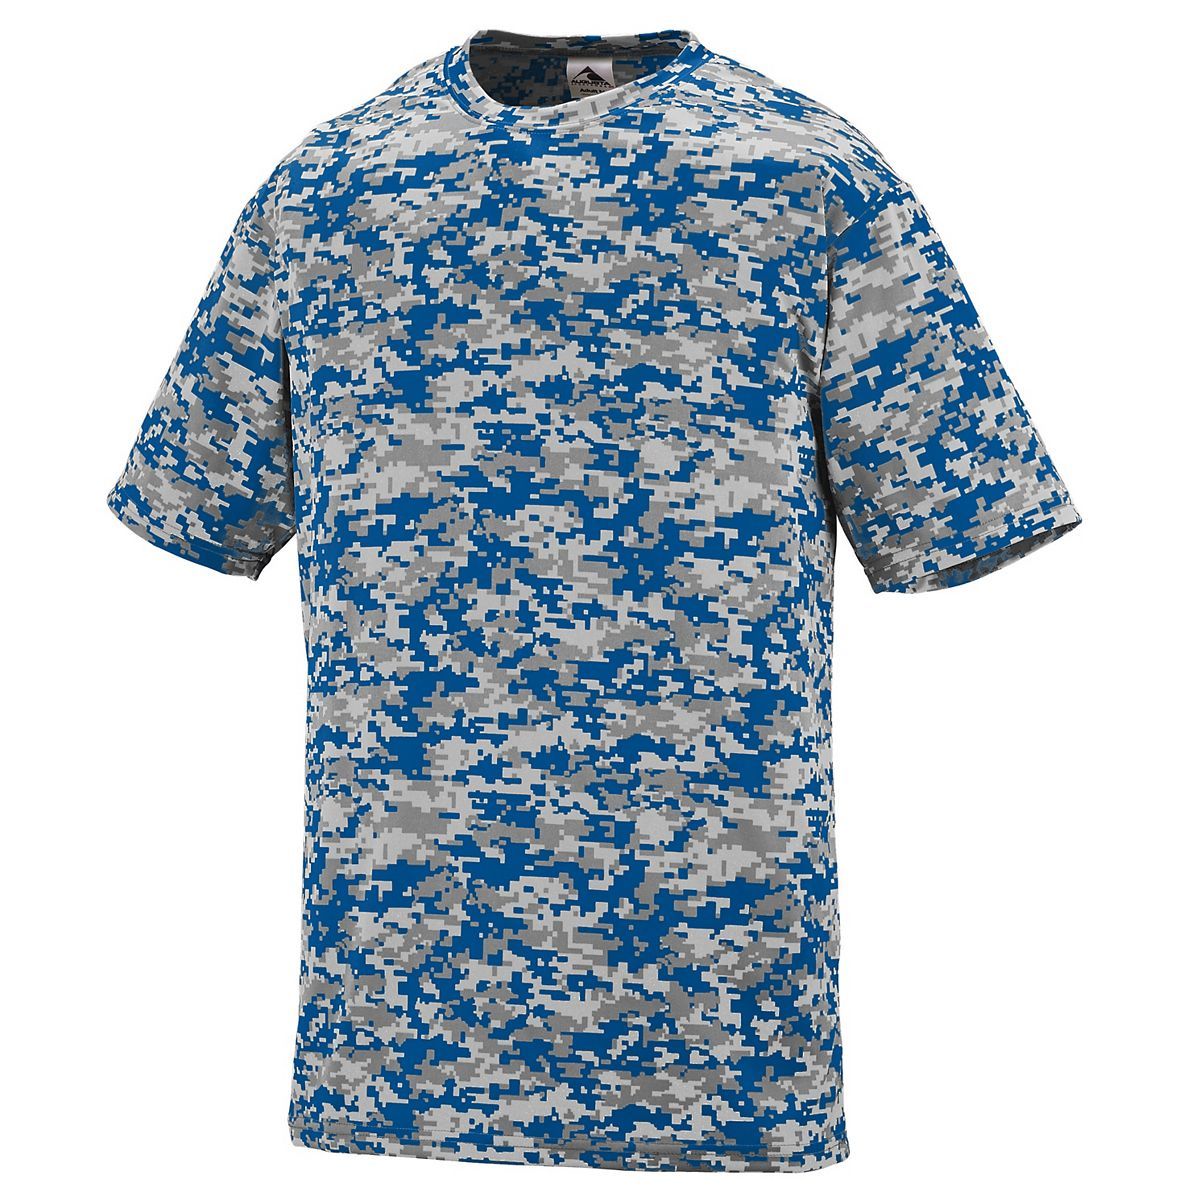 Augusta Sportswear Youth Digi Camo Wicking T-Shirt in Royal Digi  -Part of the Youth, Youth-Tee-Shirt, T-Shirts, Augusta-Products, Shirts product lines at KanaleyCreations.com